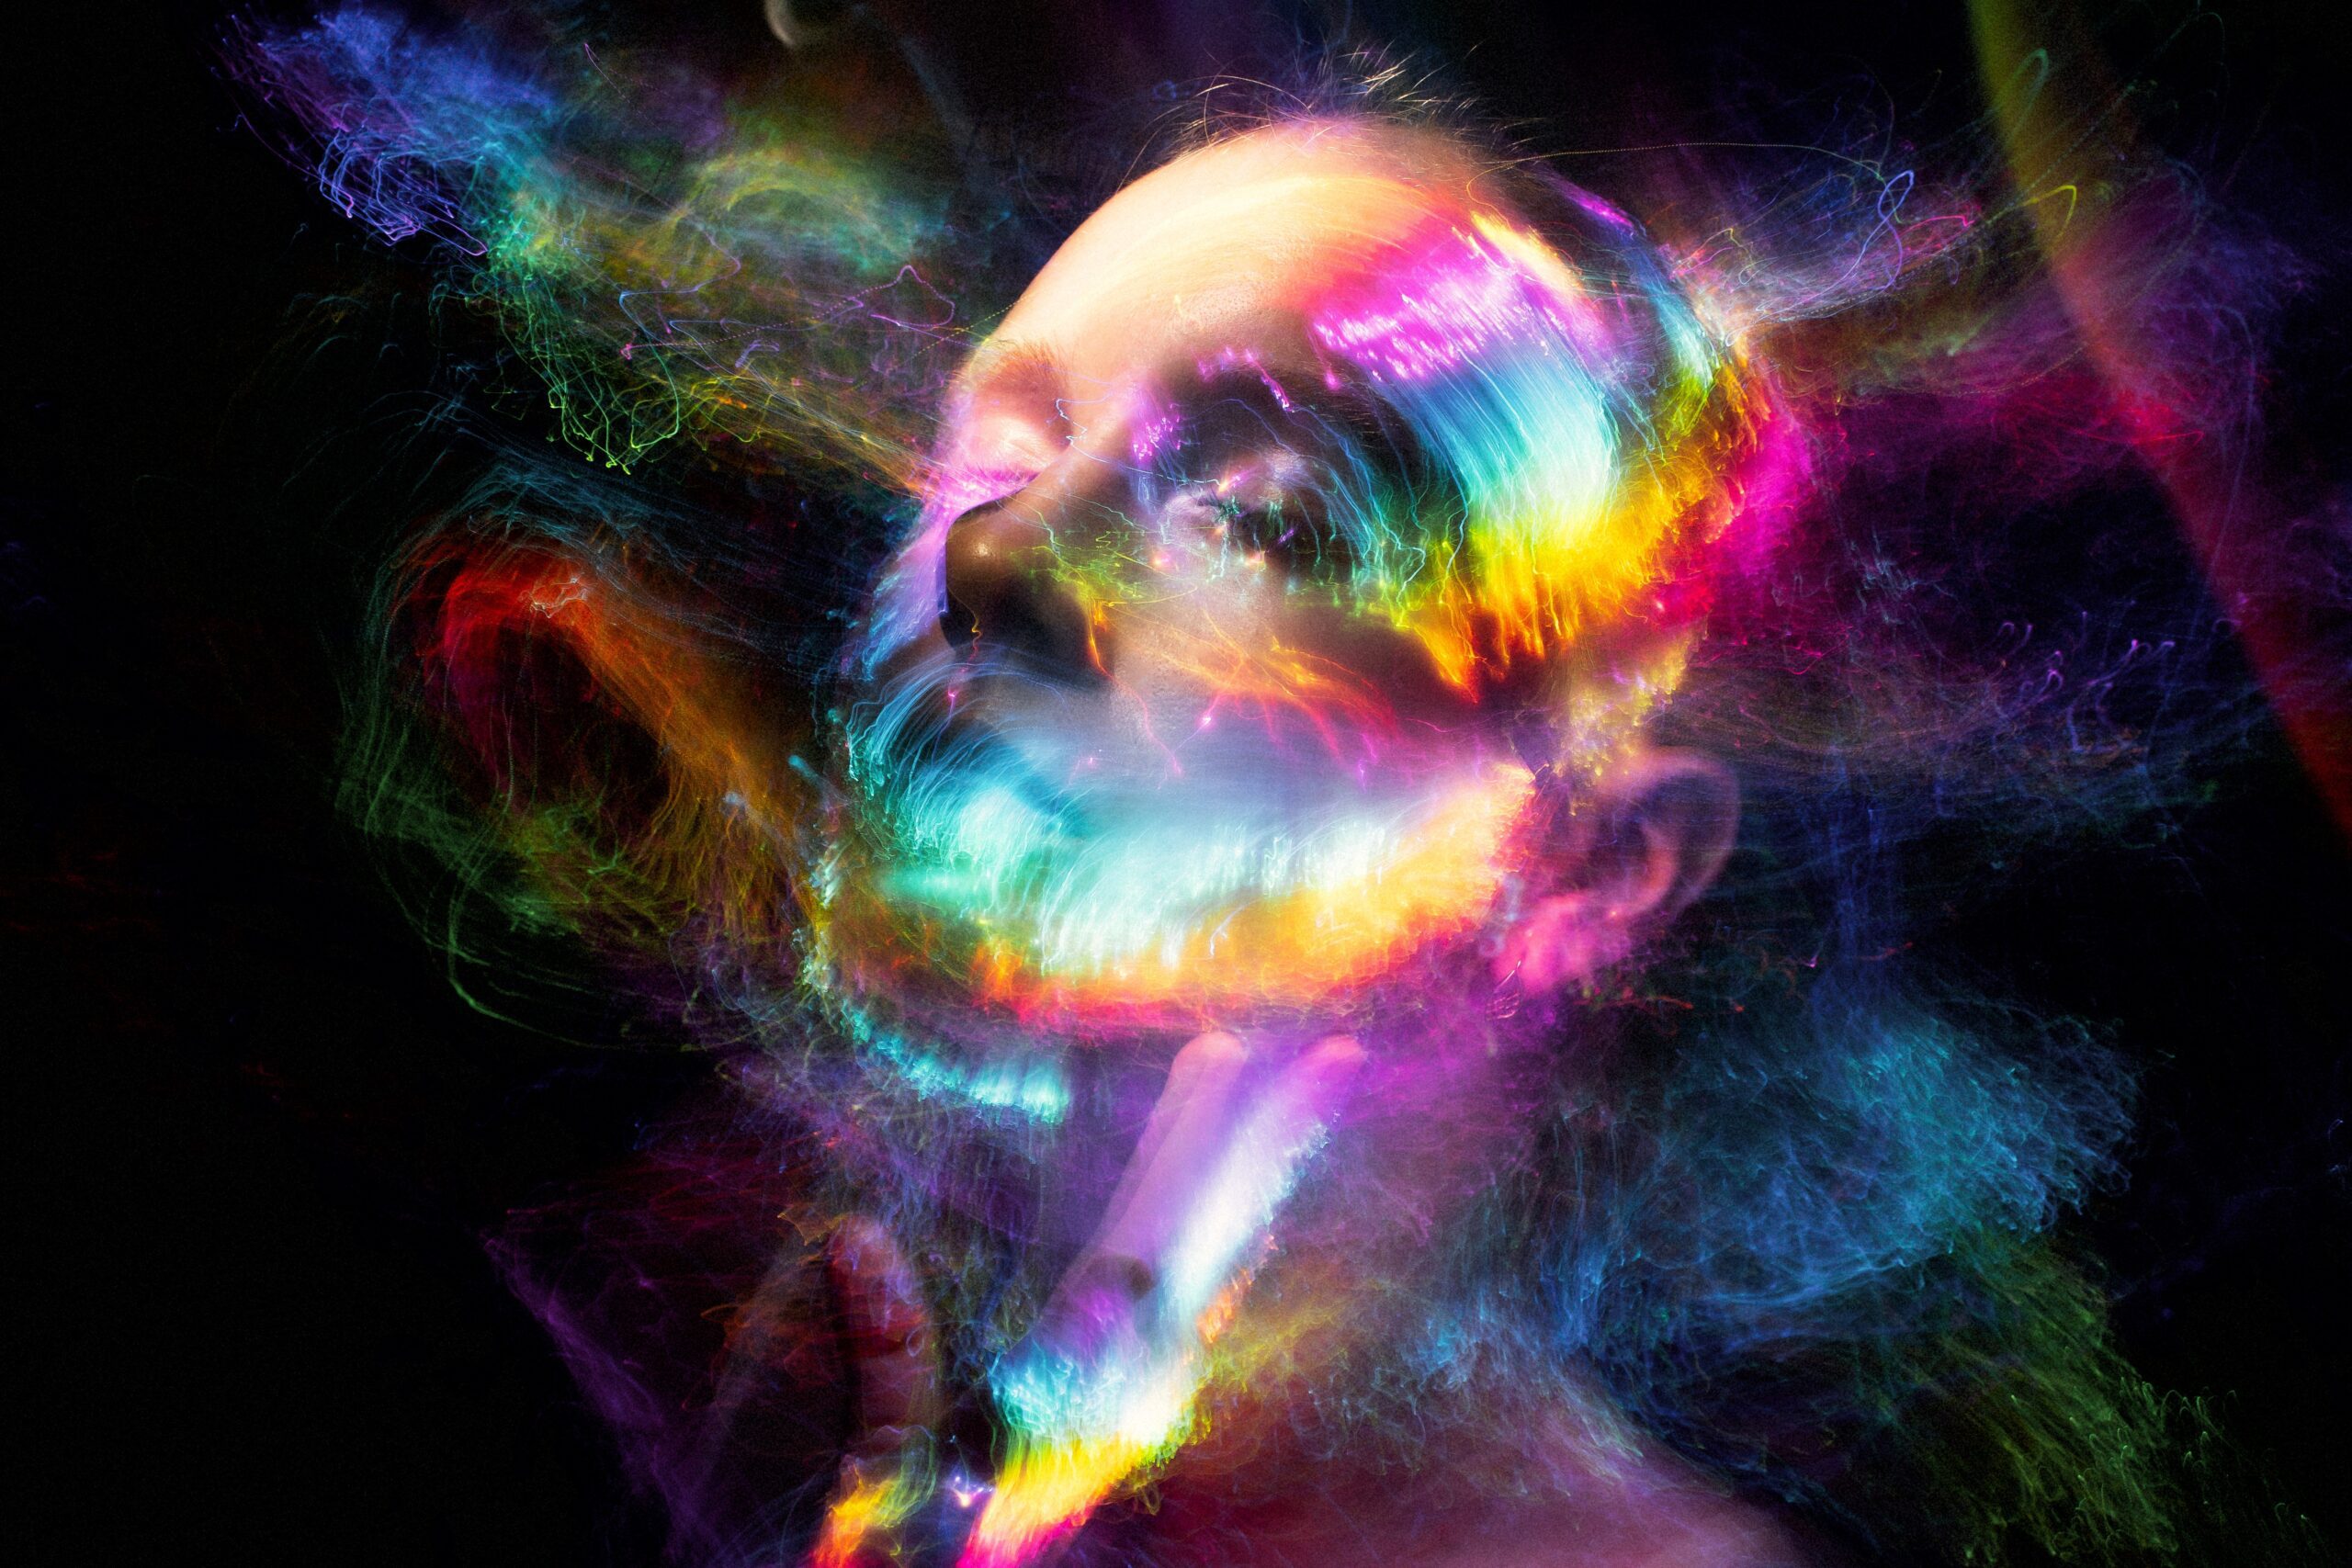 Why do subconscious beliefs come from - woman with light art superimposed on her head